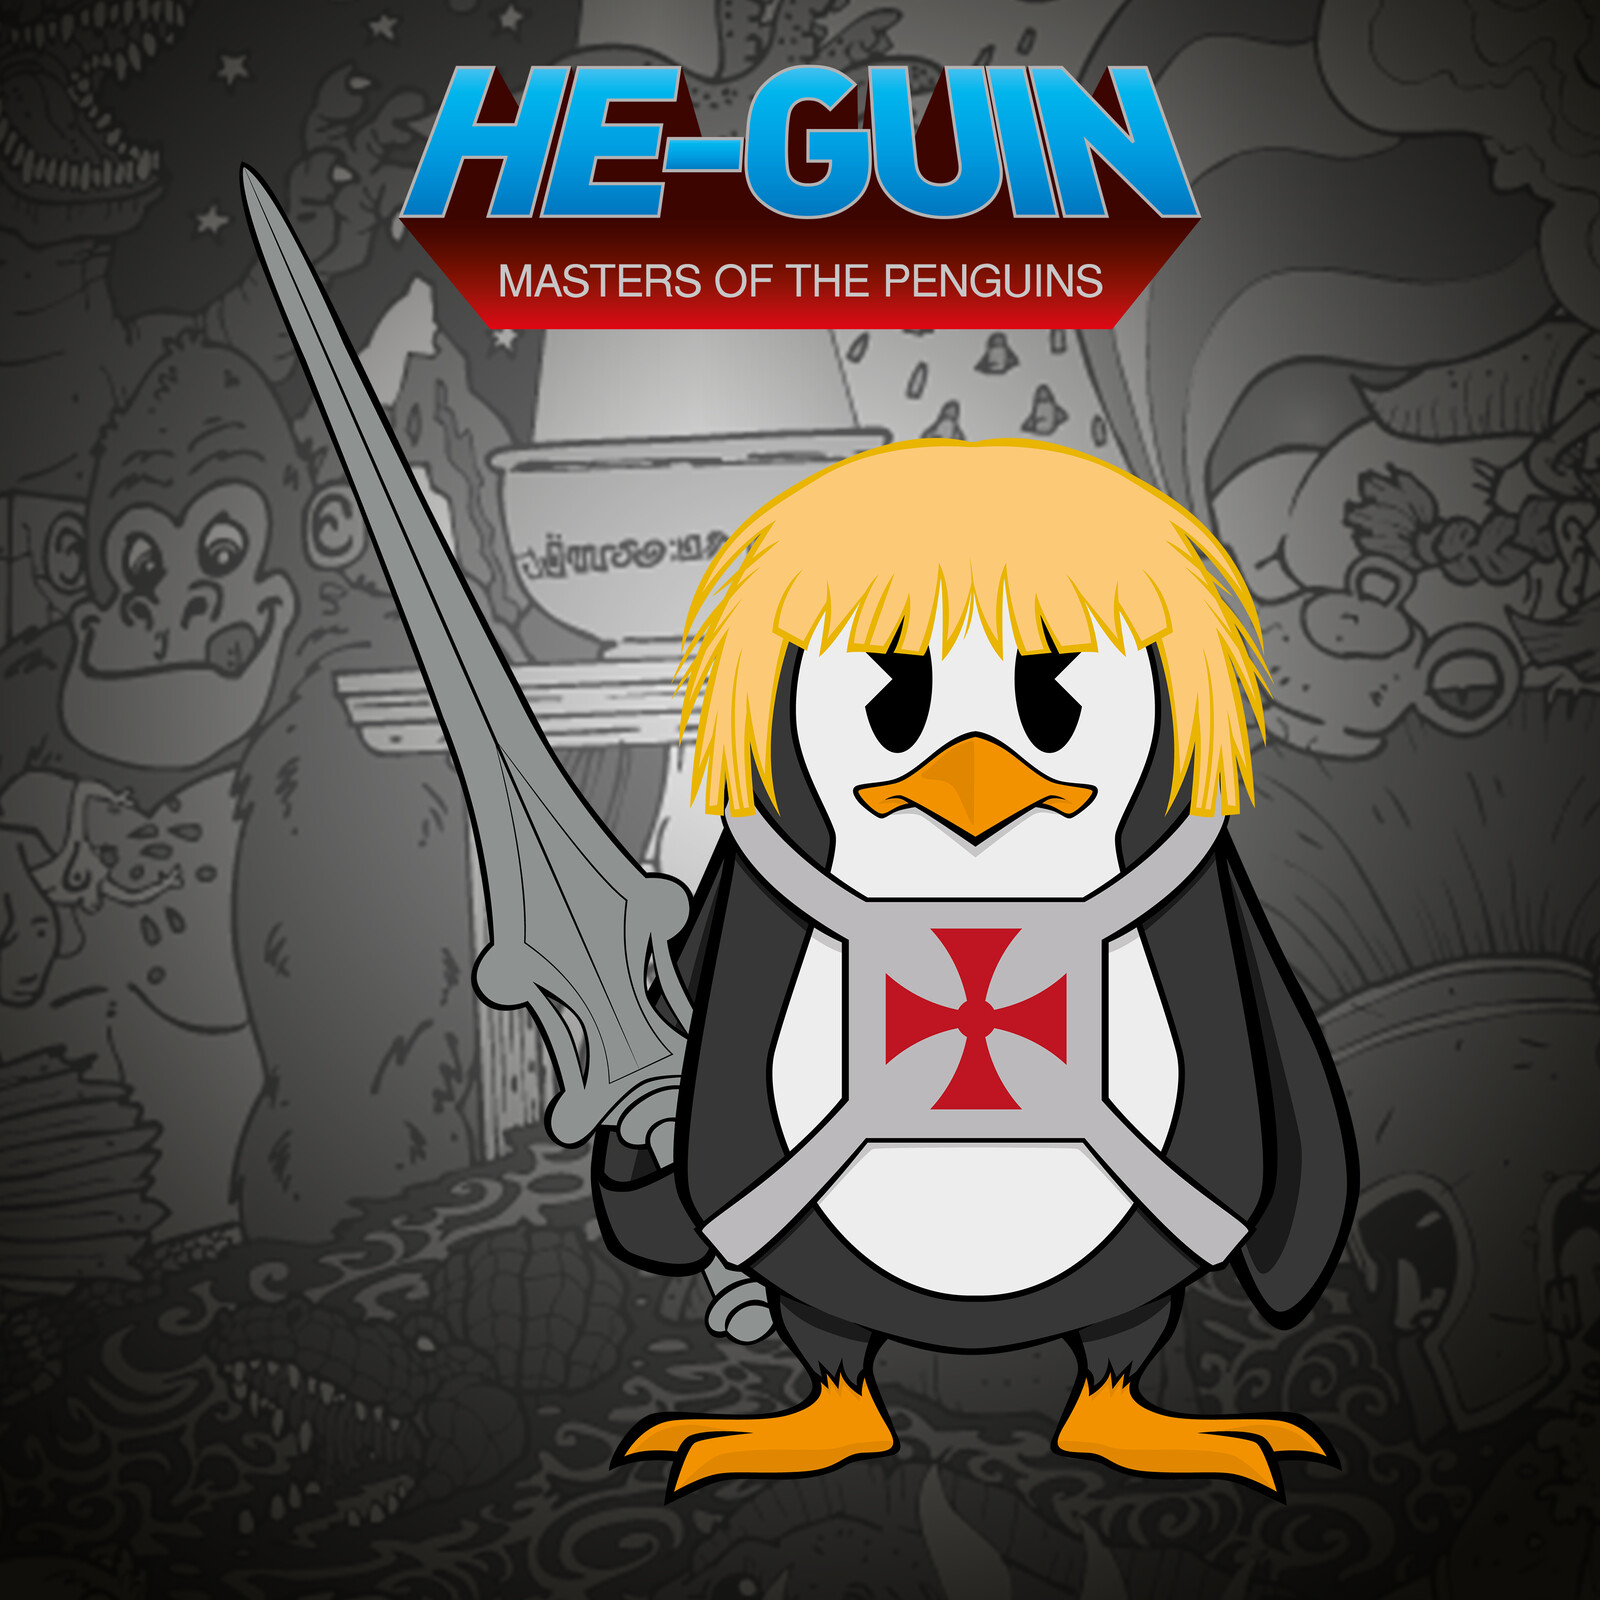 He-guin - Masters of the Universe cartoon